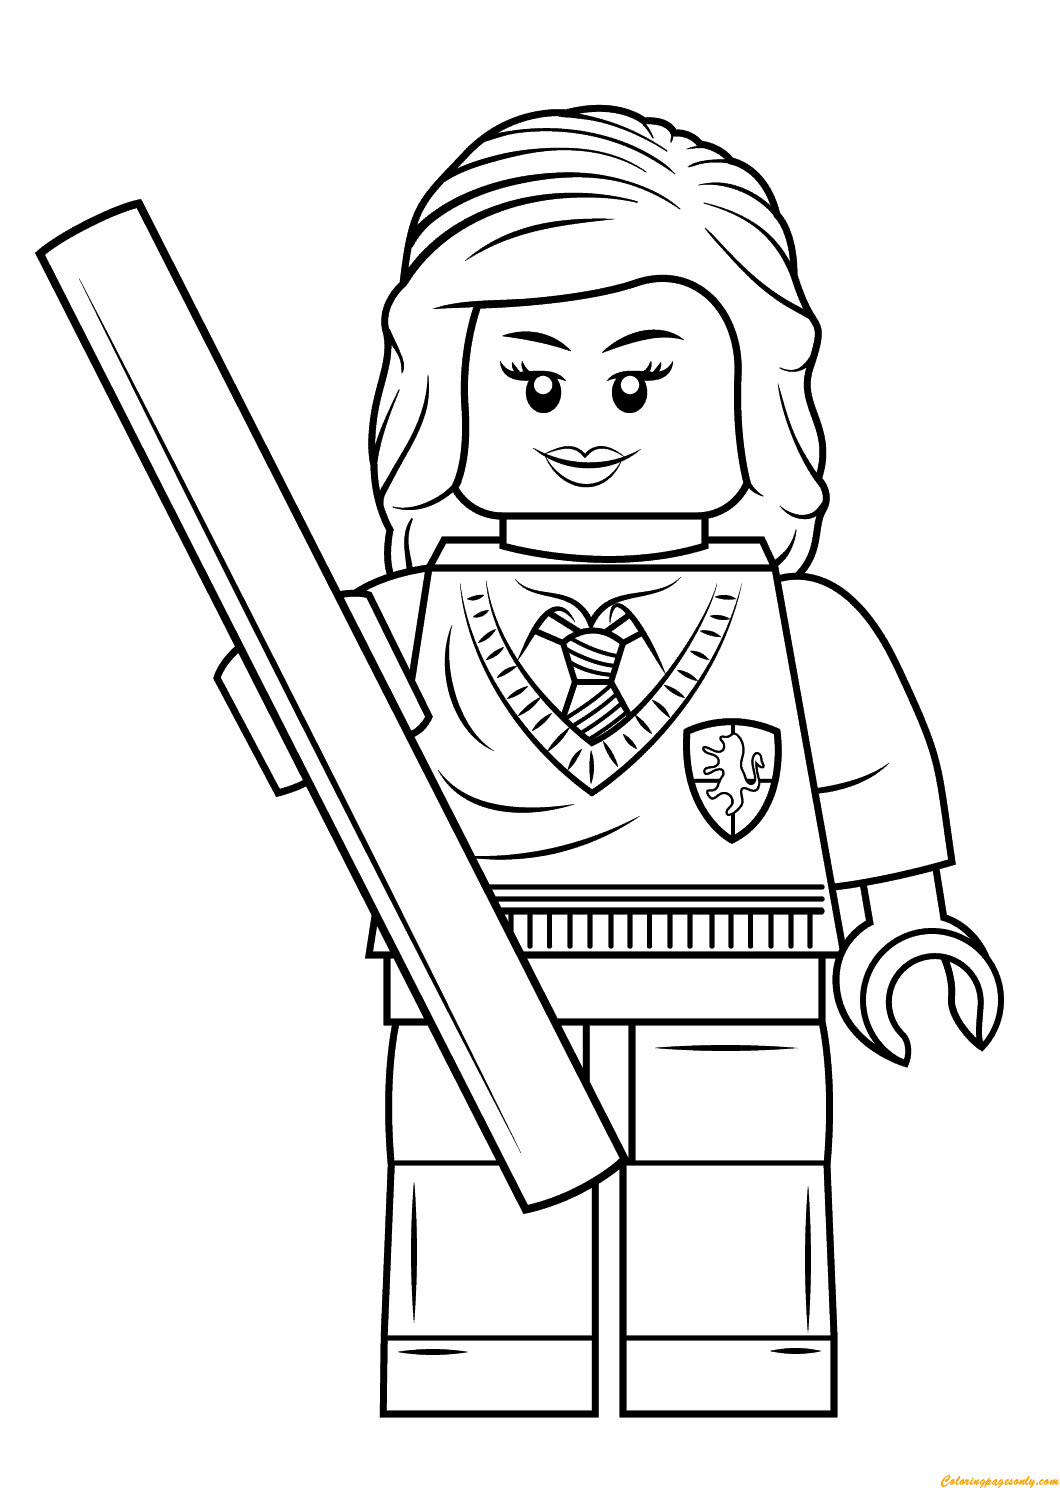 Lego Girl Coloring Pages
 Lego Harry Potter Hermione Granger Coloring Page Free